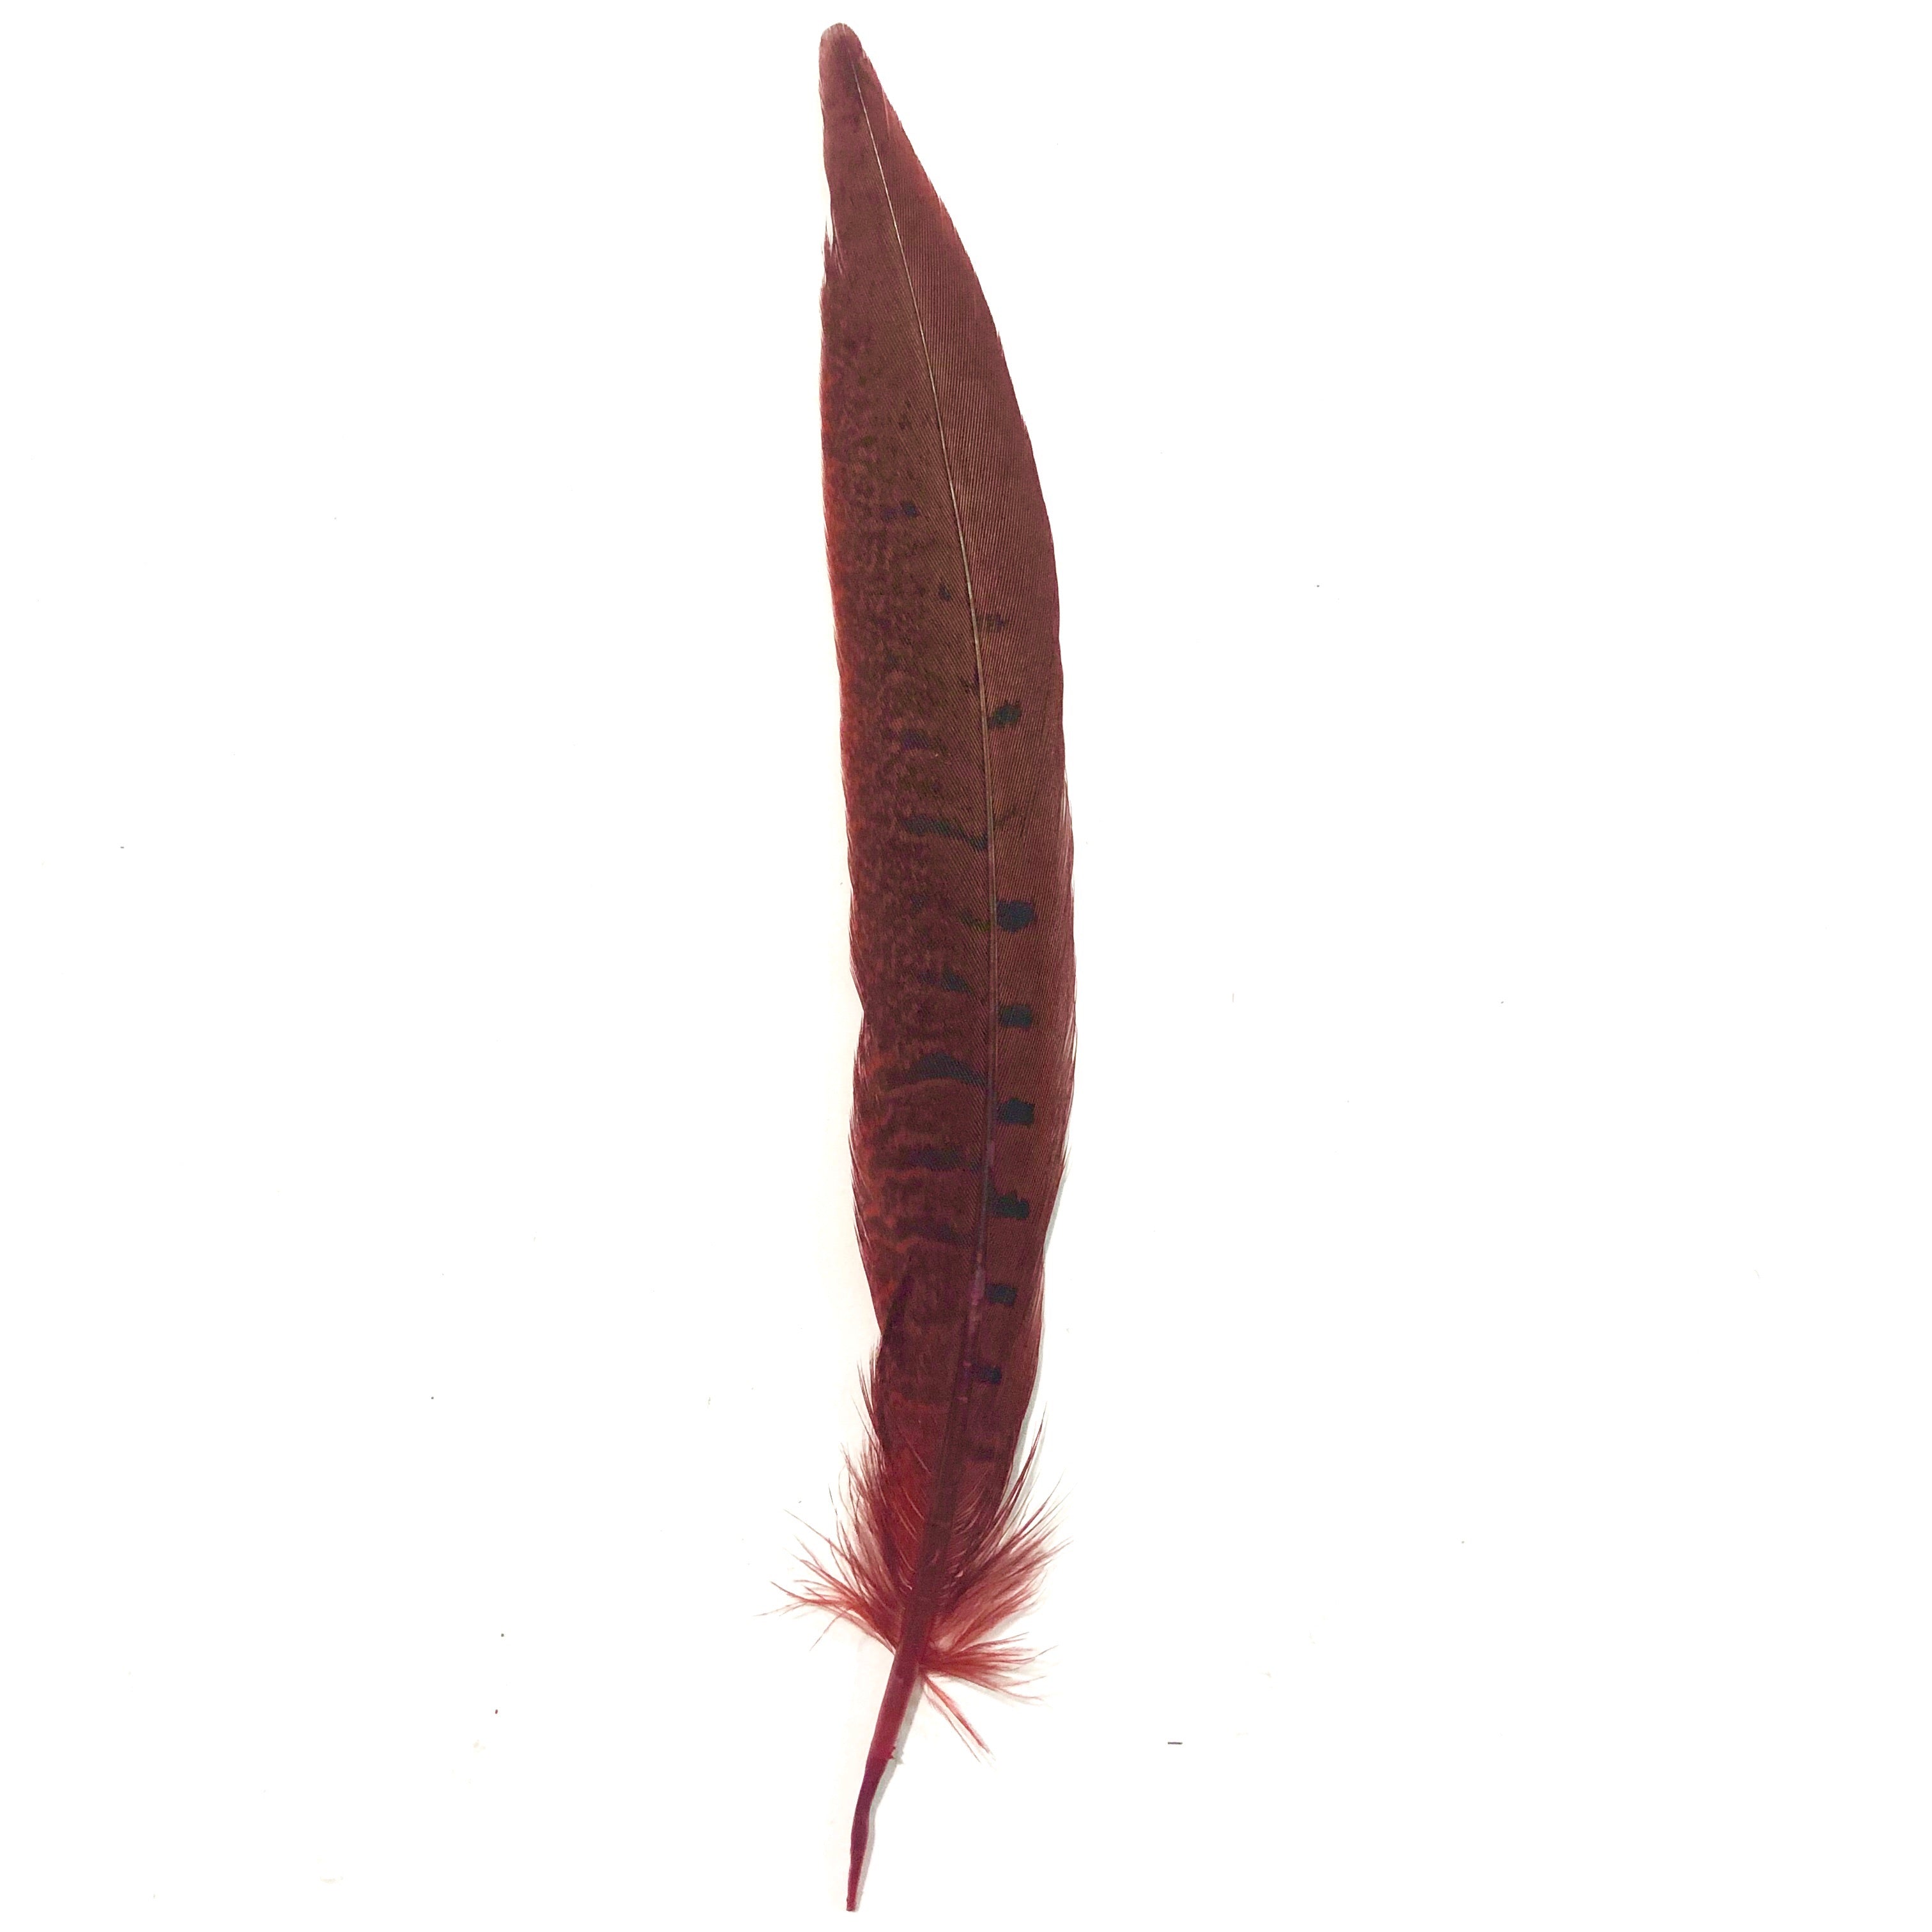 6" to 10" Ringneck Pheasant Tail Feather x 10 pcs - Red